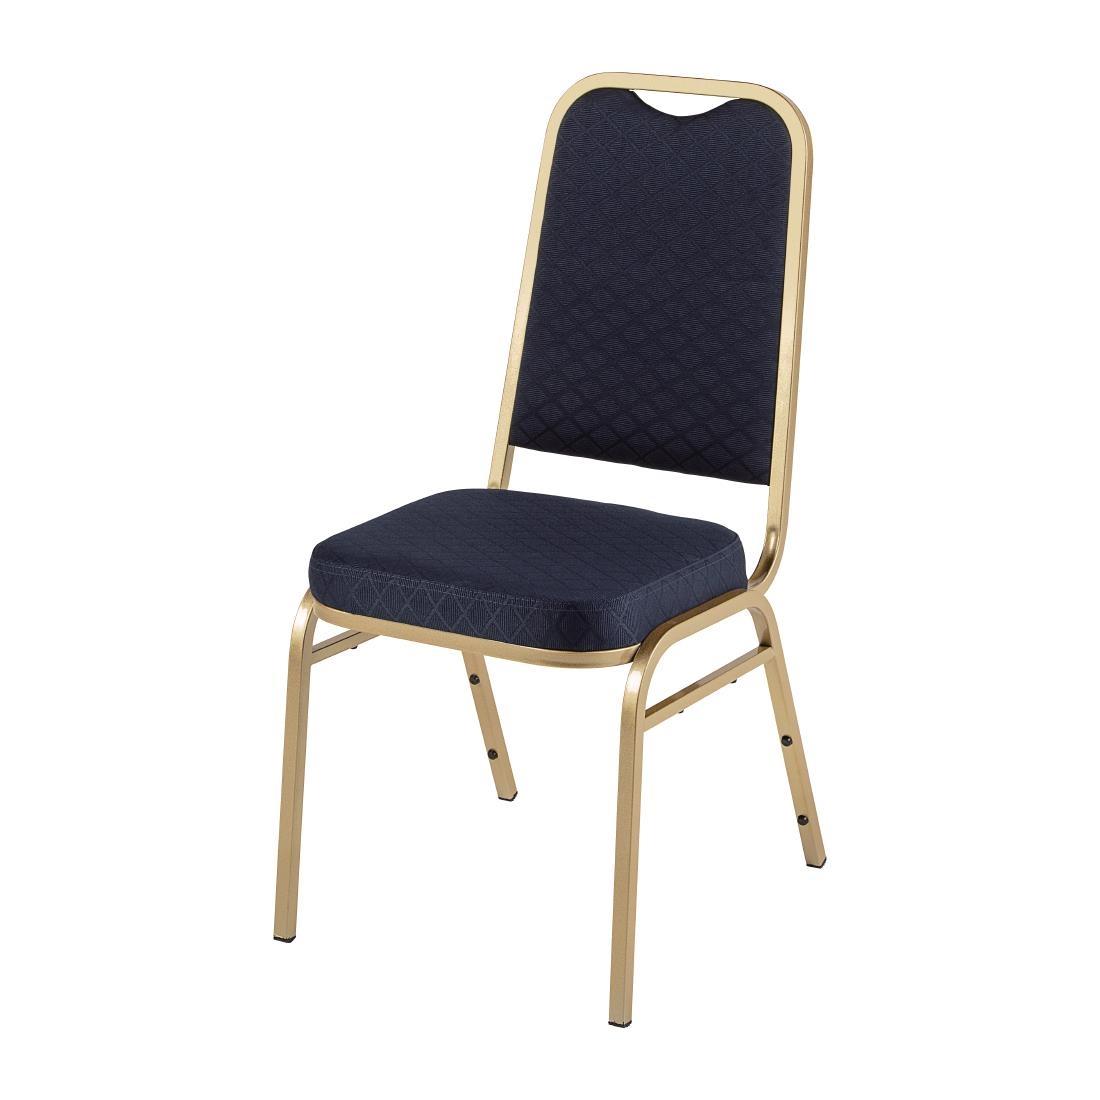 Bolero Square Back Banquet Chairs Blue & Gold (Pack of 4) - DL015  - 1